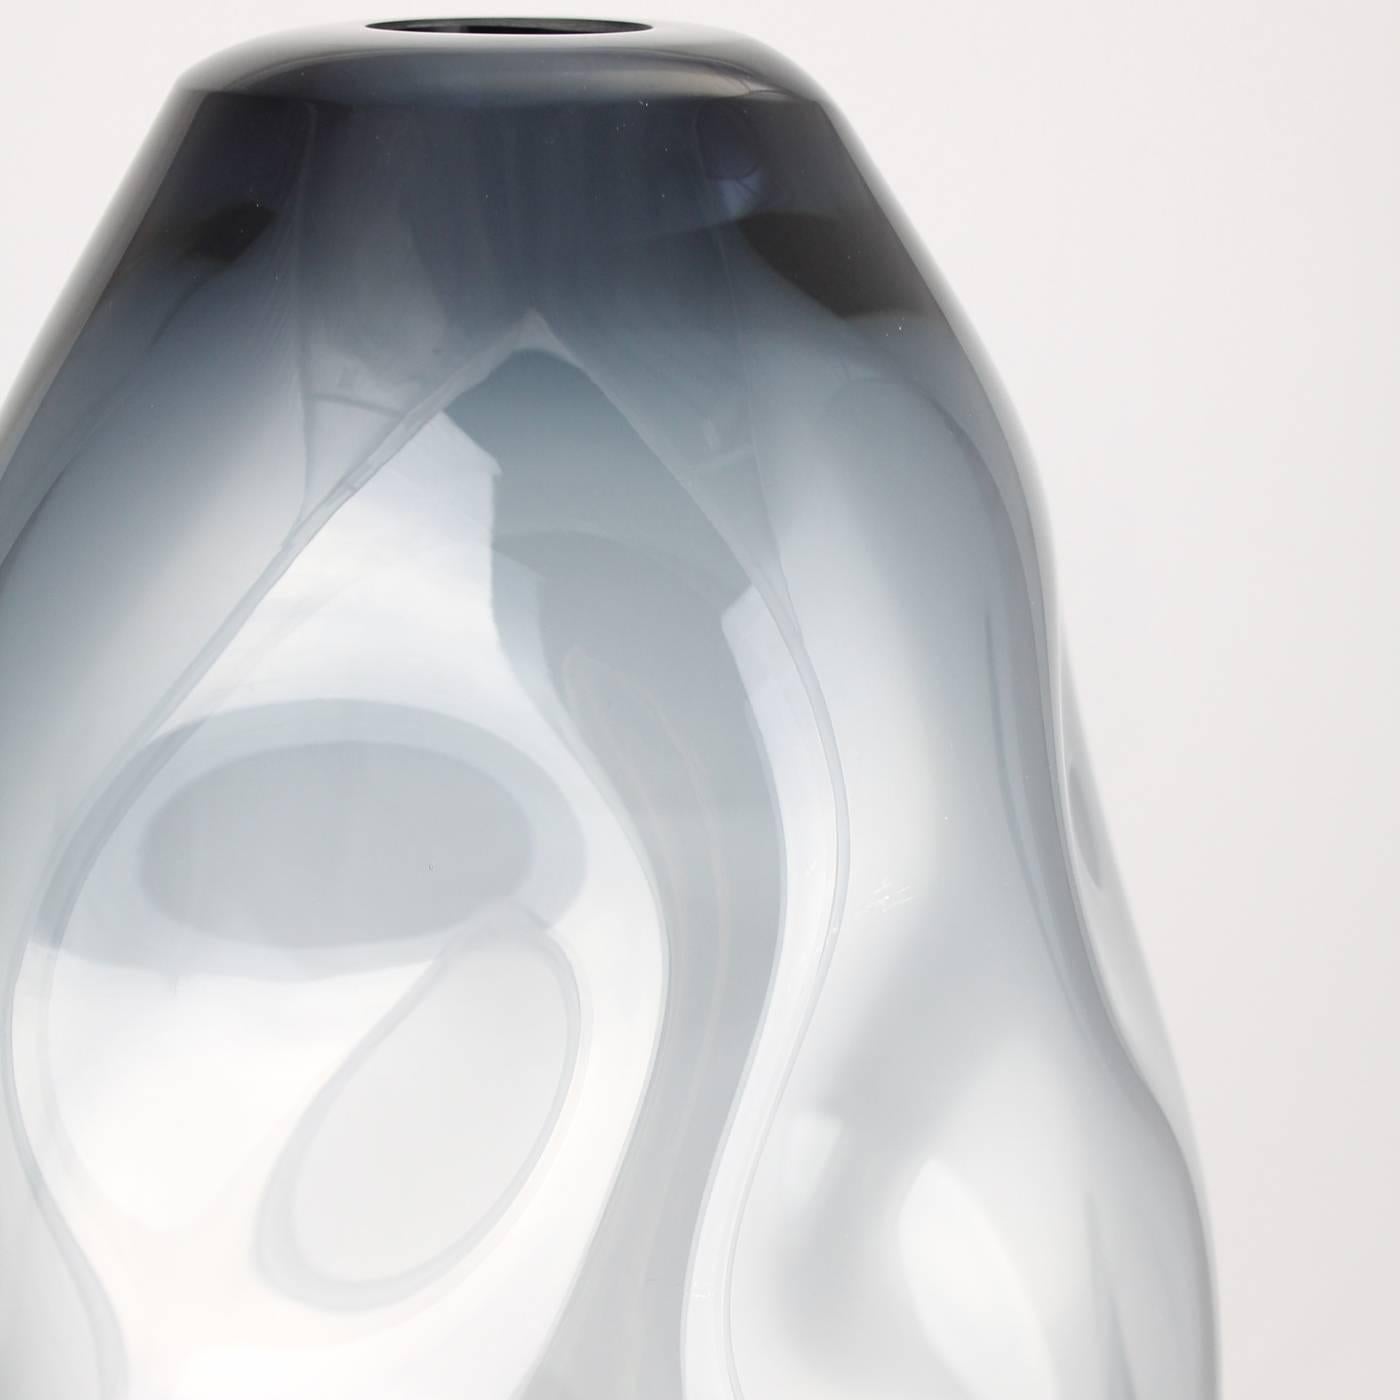 A unique piece mouth-blown by Murano legend Paolo Crepax, this vase has a delicate tinted shade and sinuous curves, all unique, since no piece can be identical to the other. Part of an exclusive series of 99 refined pieces, this vase is signed by